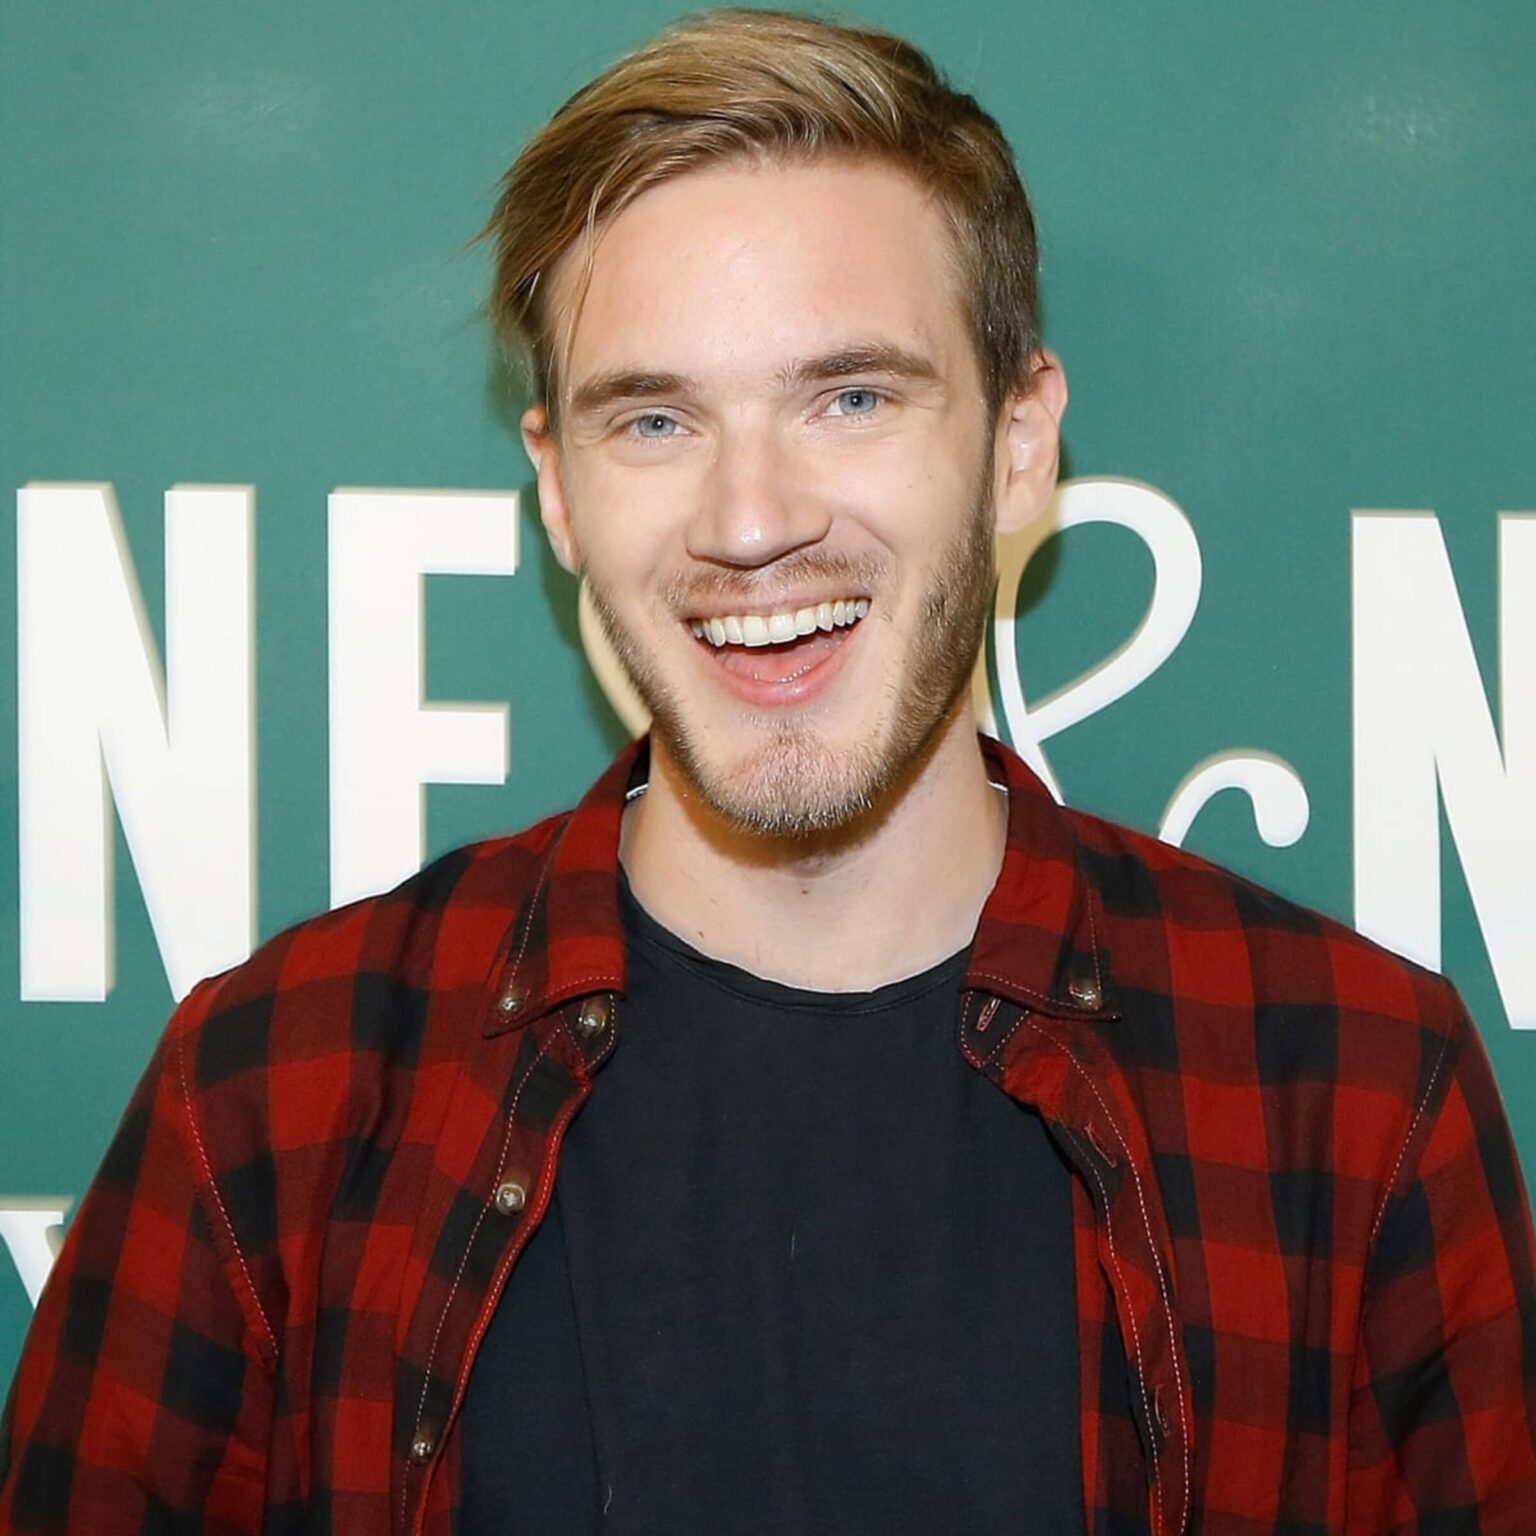 Everyone at least has heard of PewDiePie, the insanely popular YouTube sensation. Learn more about the meme master PewDiePie now.